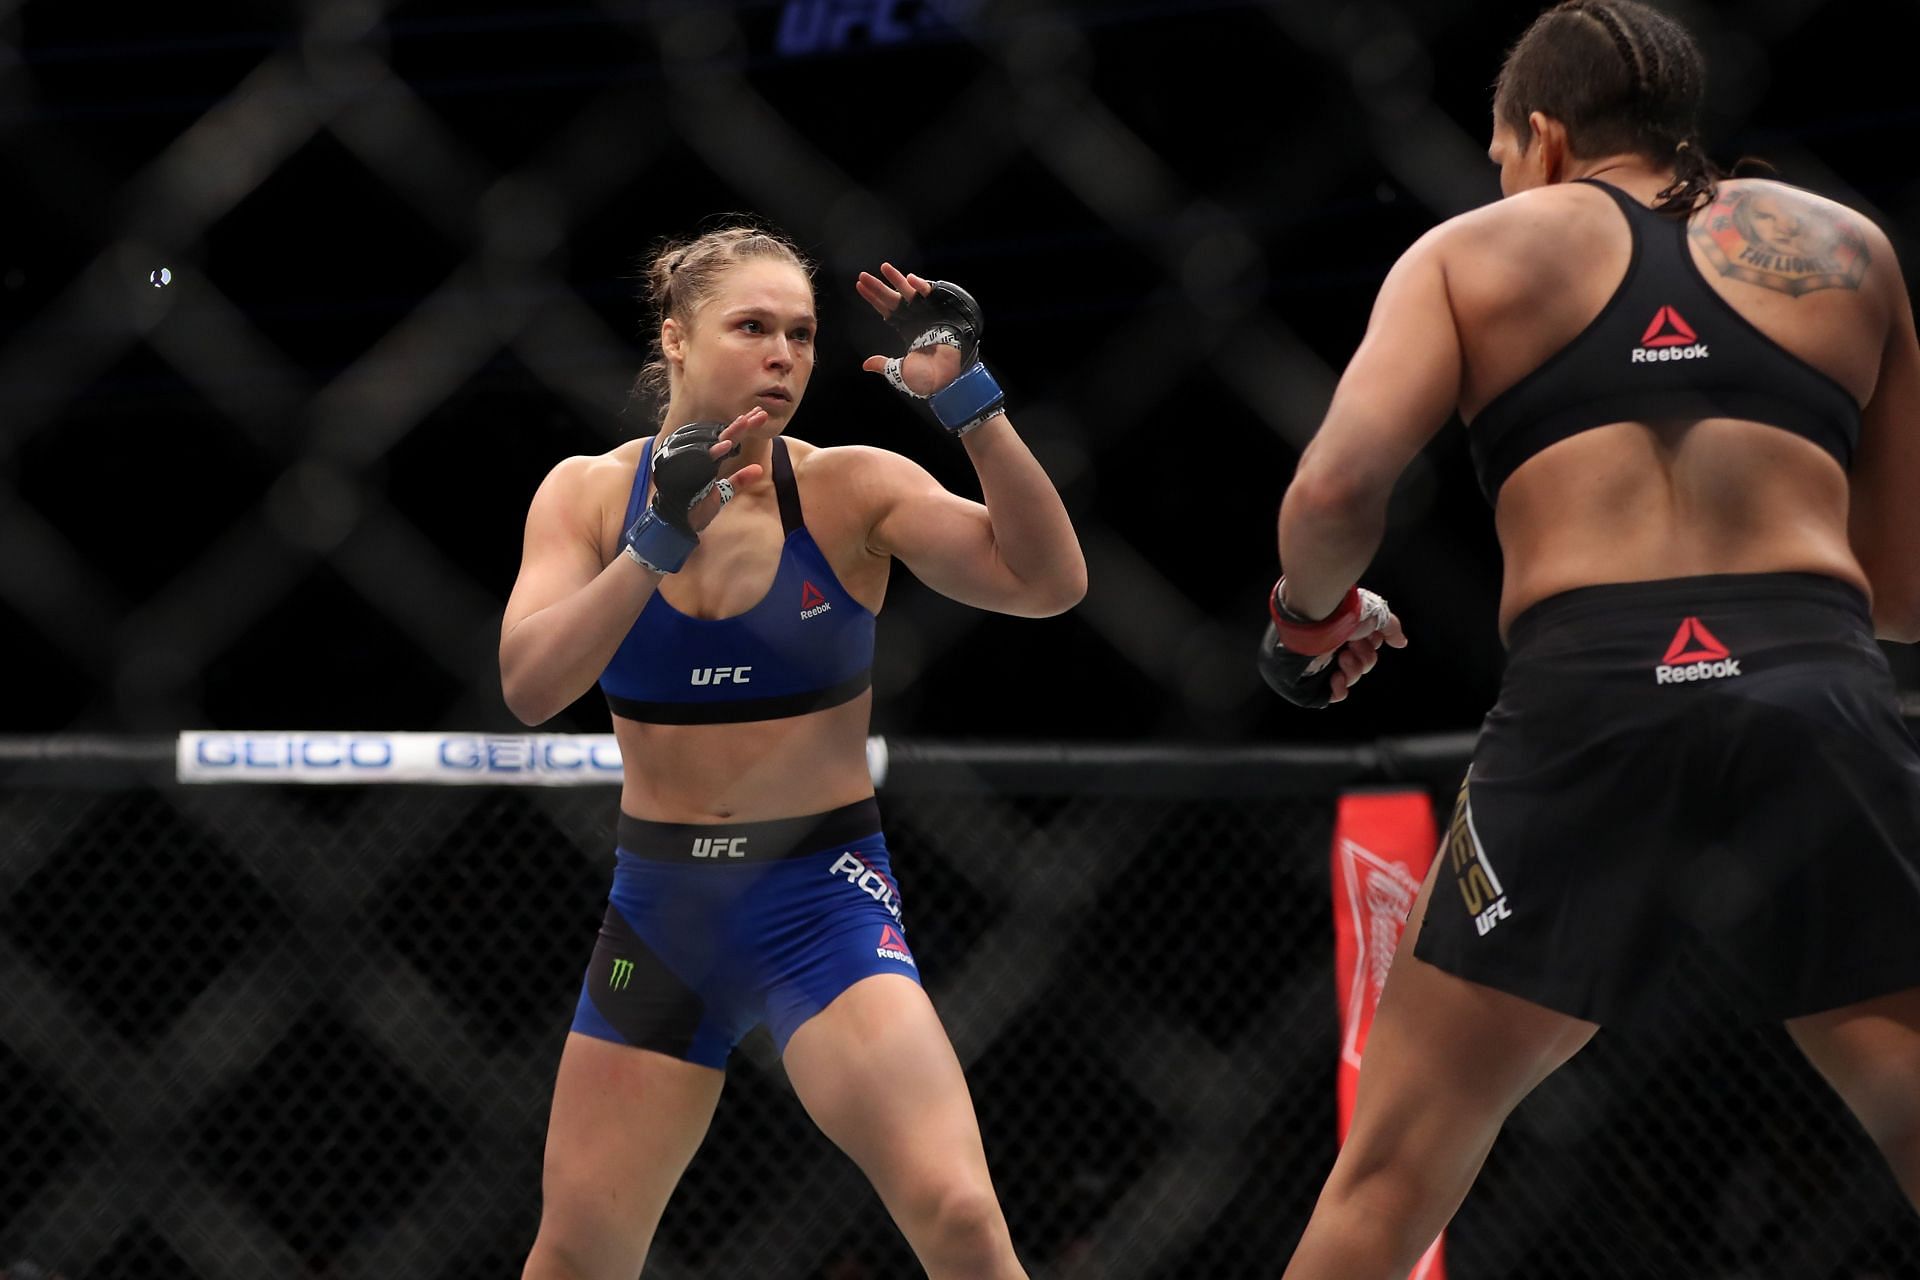 Ronda Rousey has a professional record of 12-2